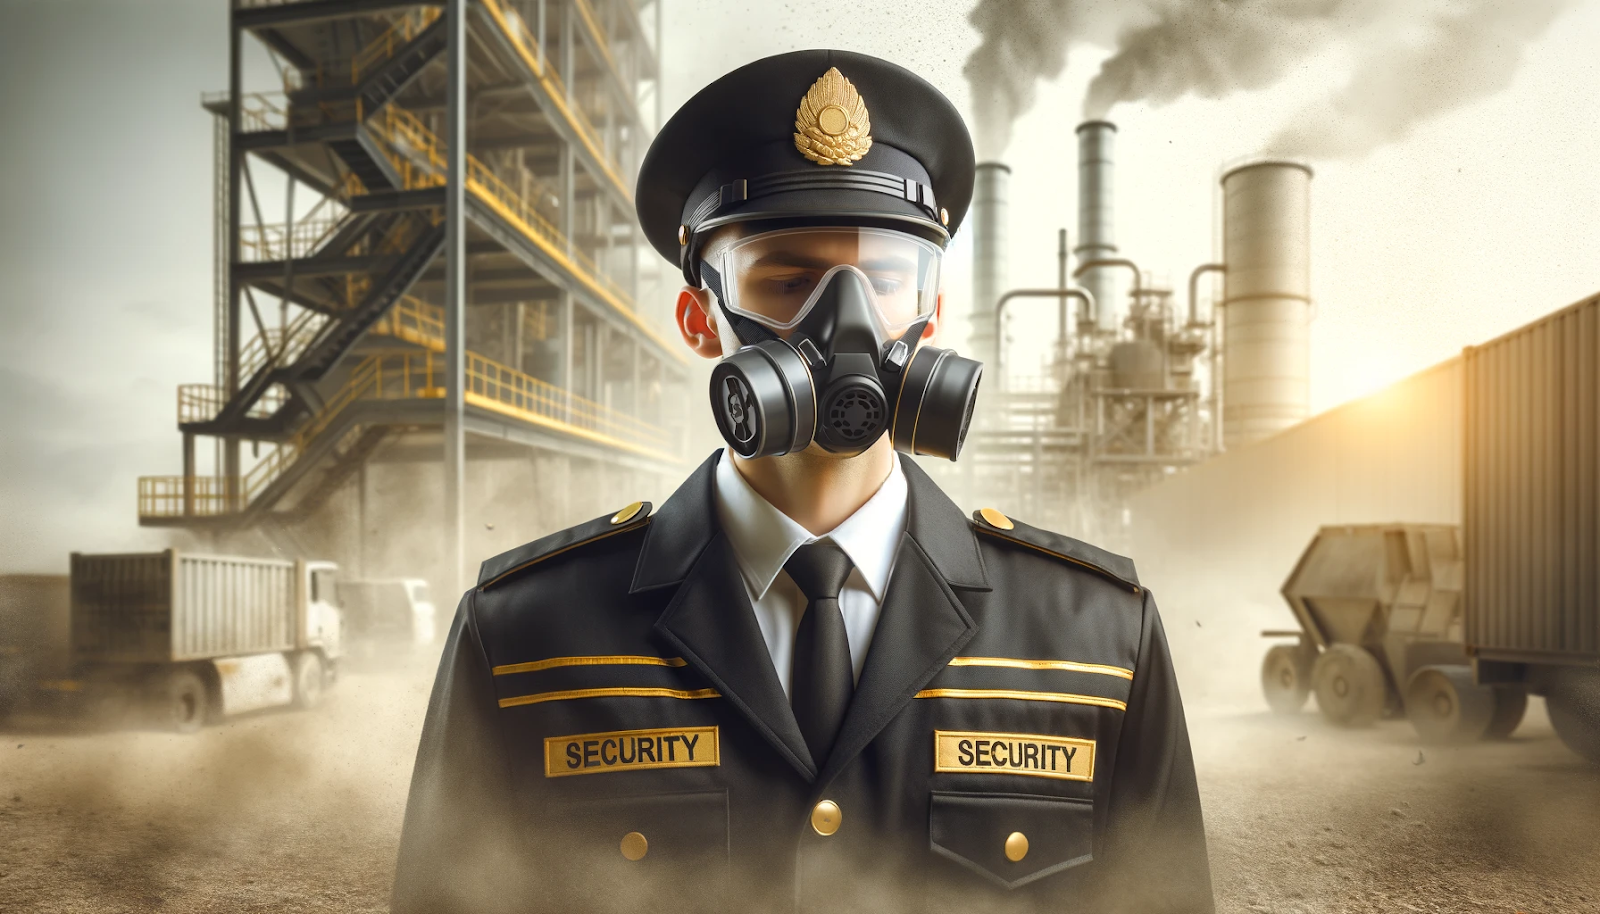 The image is a photorealistic representation symbolizing respiratory protection for security guards. It features black and gold colors, emphasizing the importance and professionalism of security personnel. 